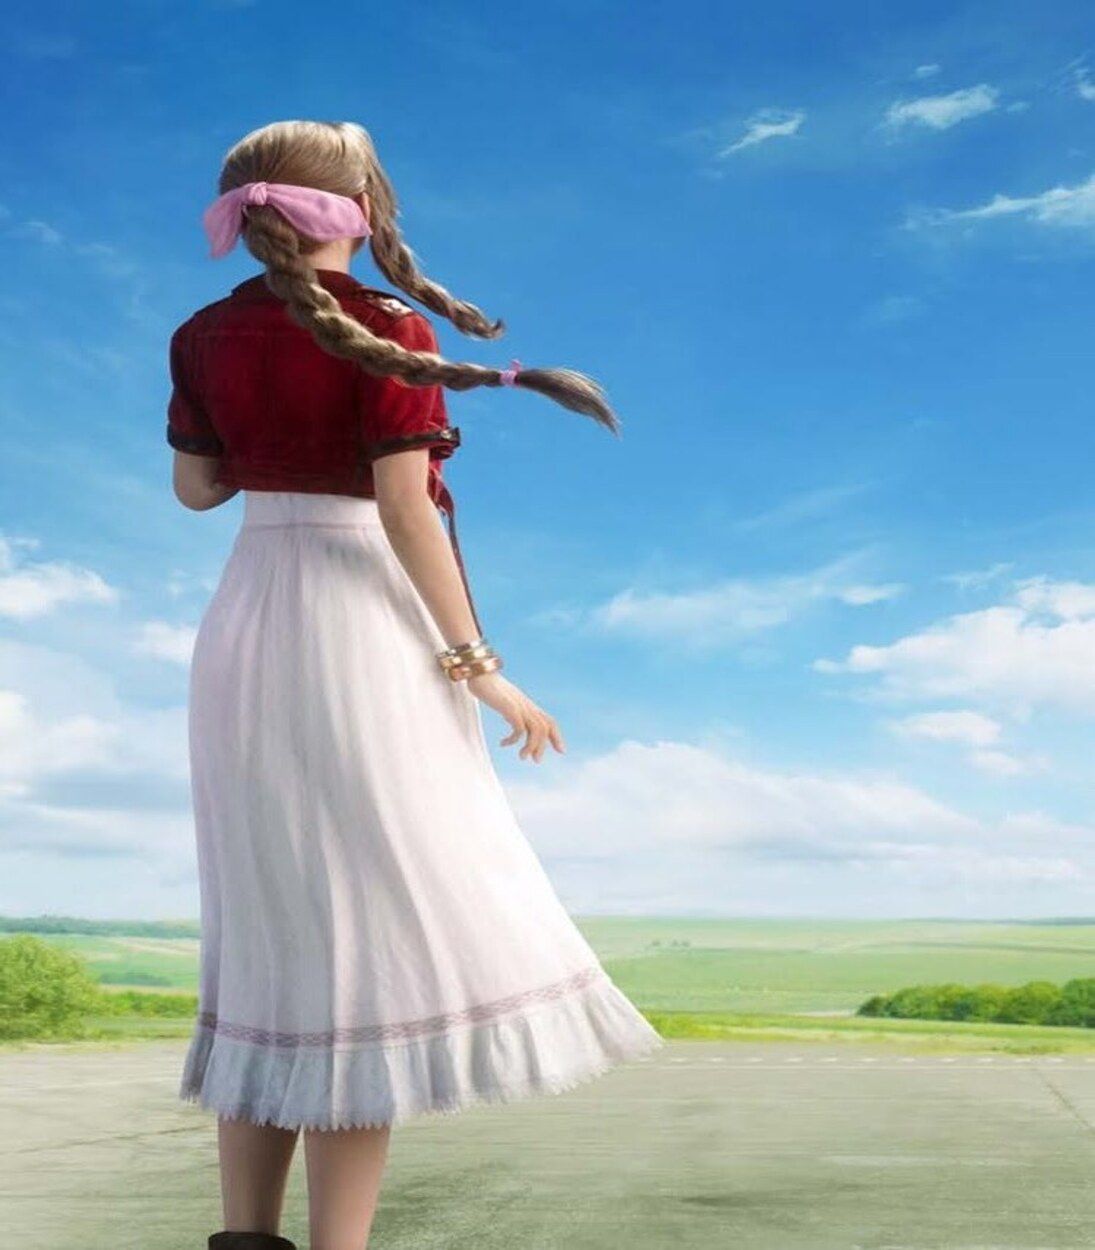 Final Fantasy 7 Remake Aerith Looking At The Sky Vertical